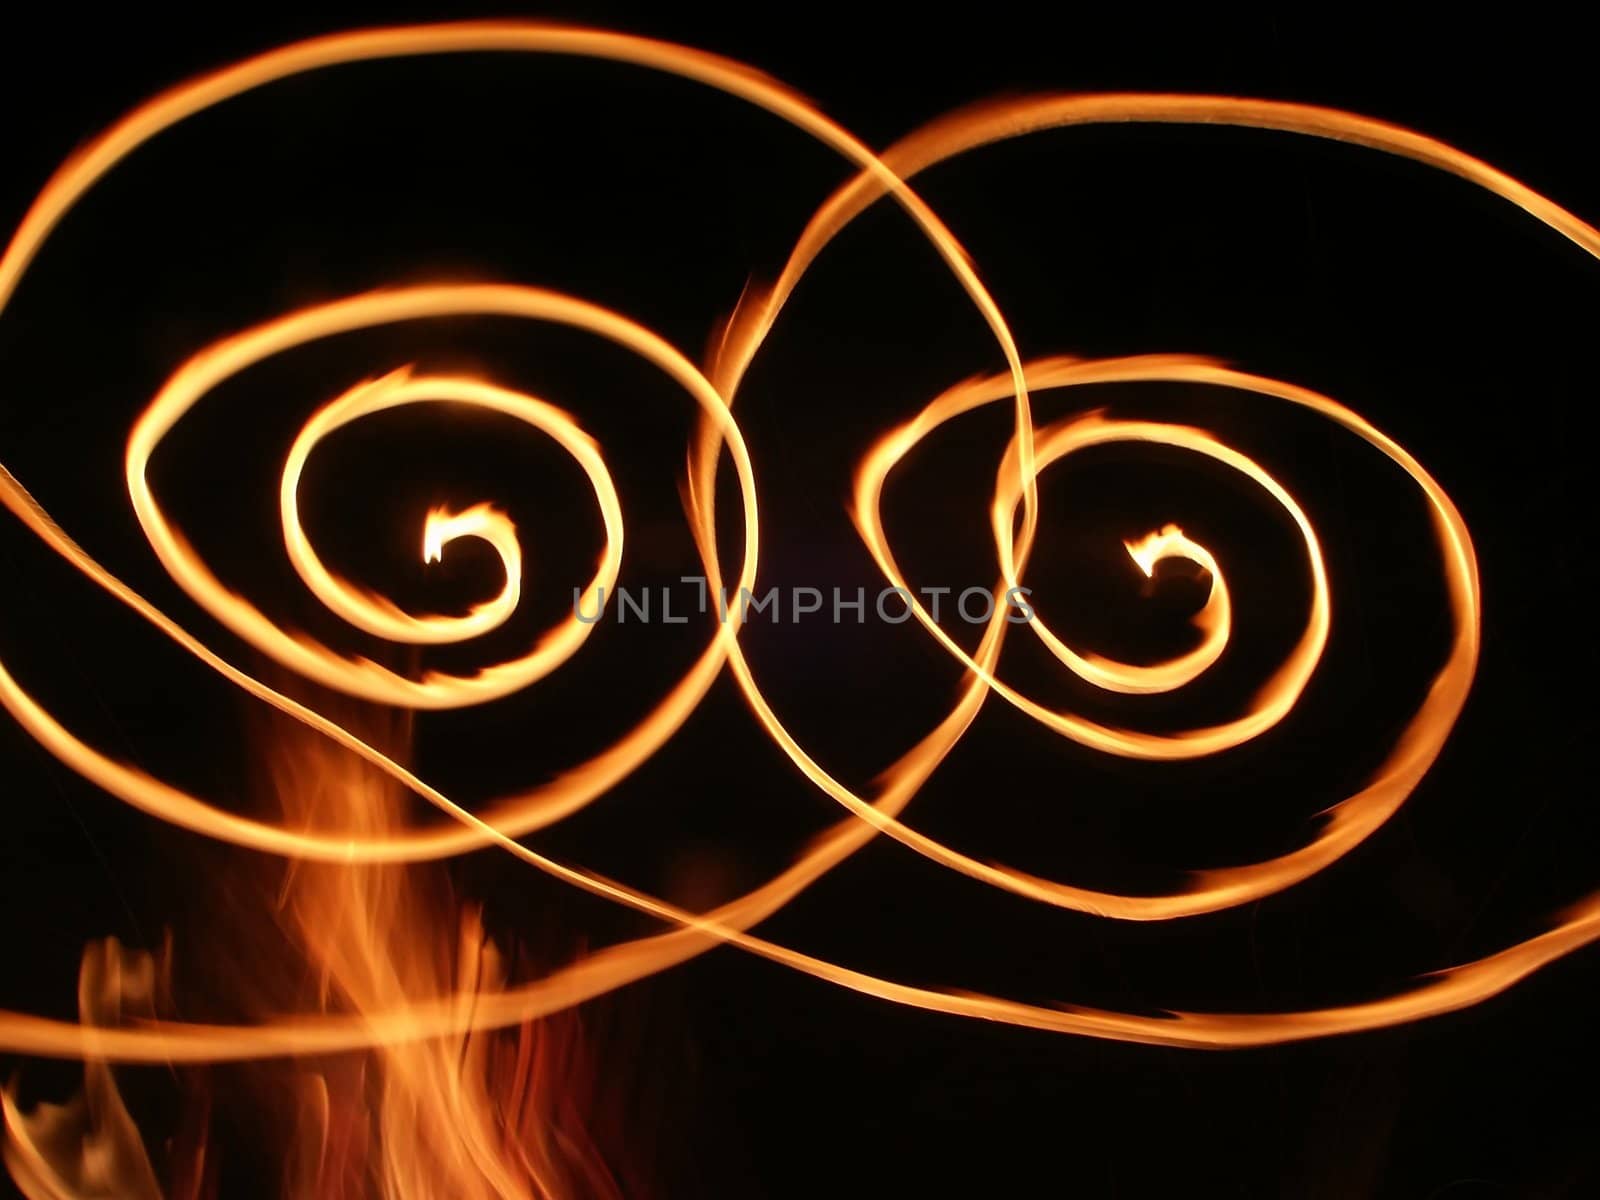 Swirls of Flame by Wirepec